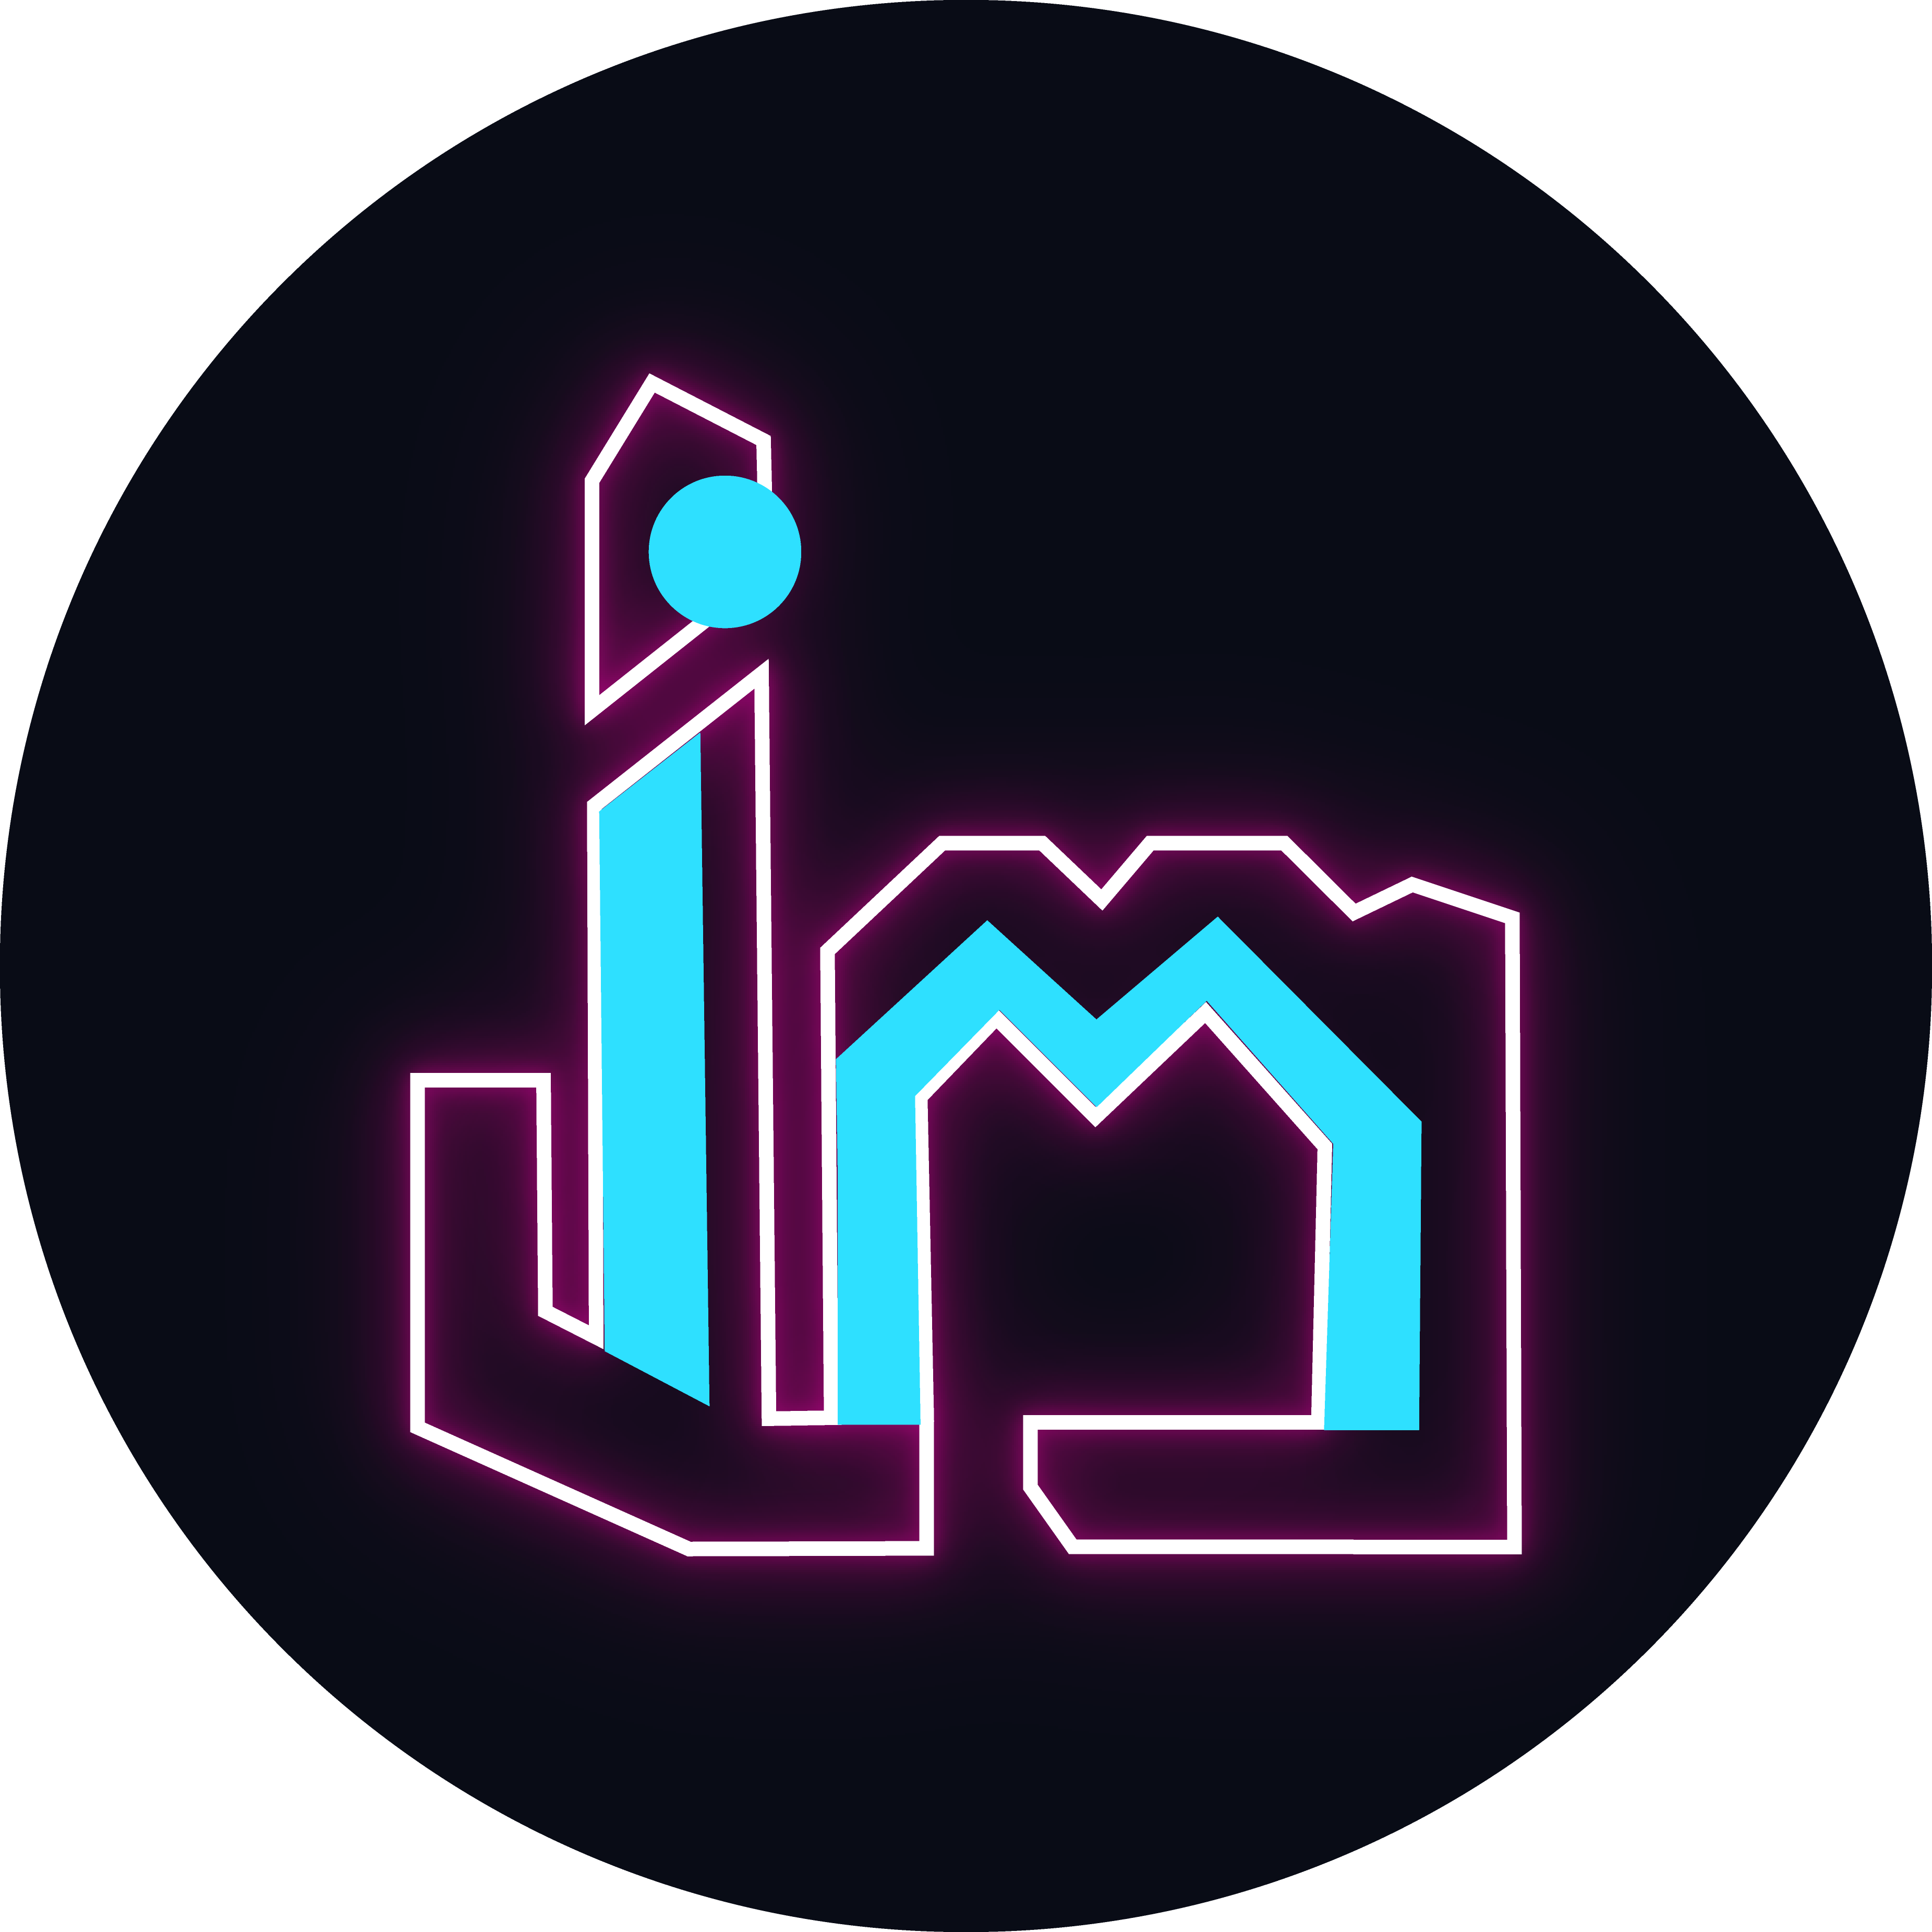 A round logo with black background. The letters IM have been joined together by pink neon outline, with blue highlights leaning to the left inside the outline. The design has a modern graphic look.